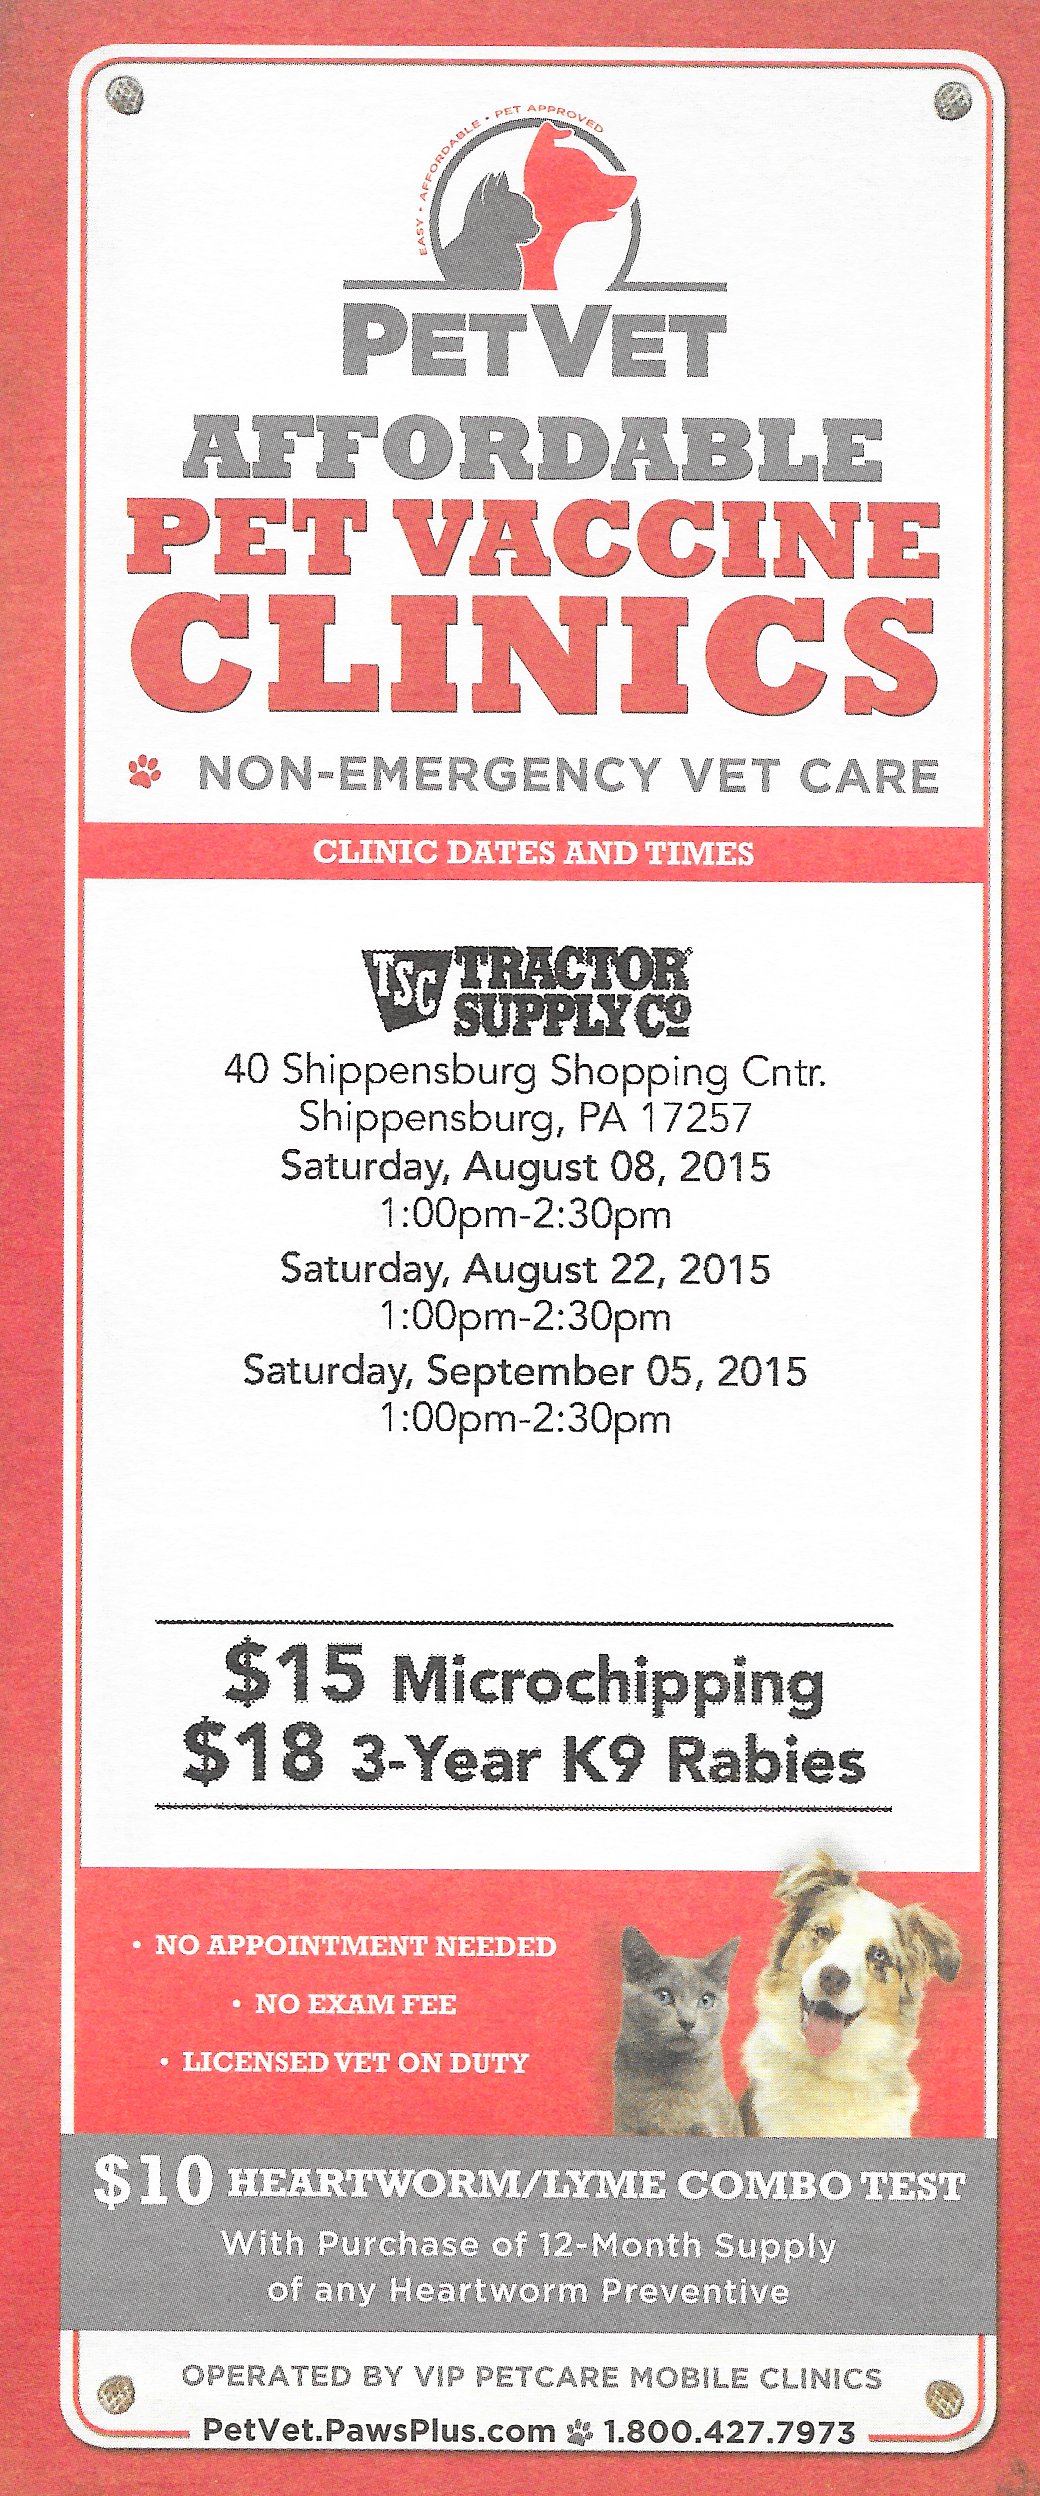 Tractor Supply | Affordable Pet Vaccine Clinics | Ship Saves